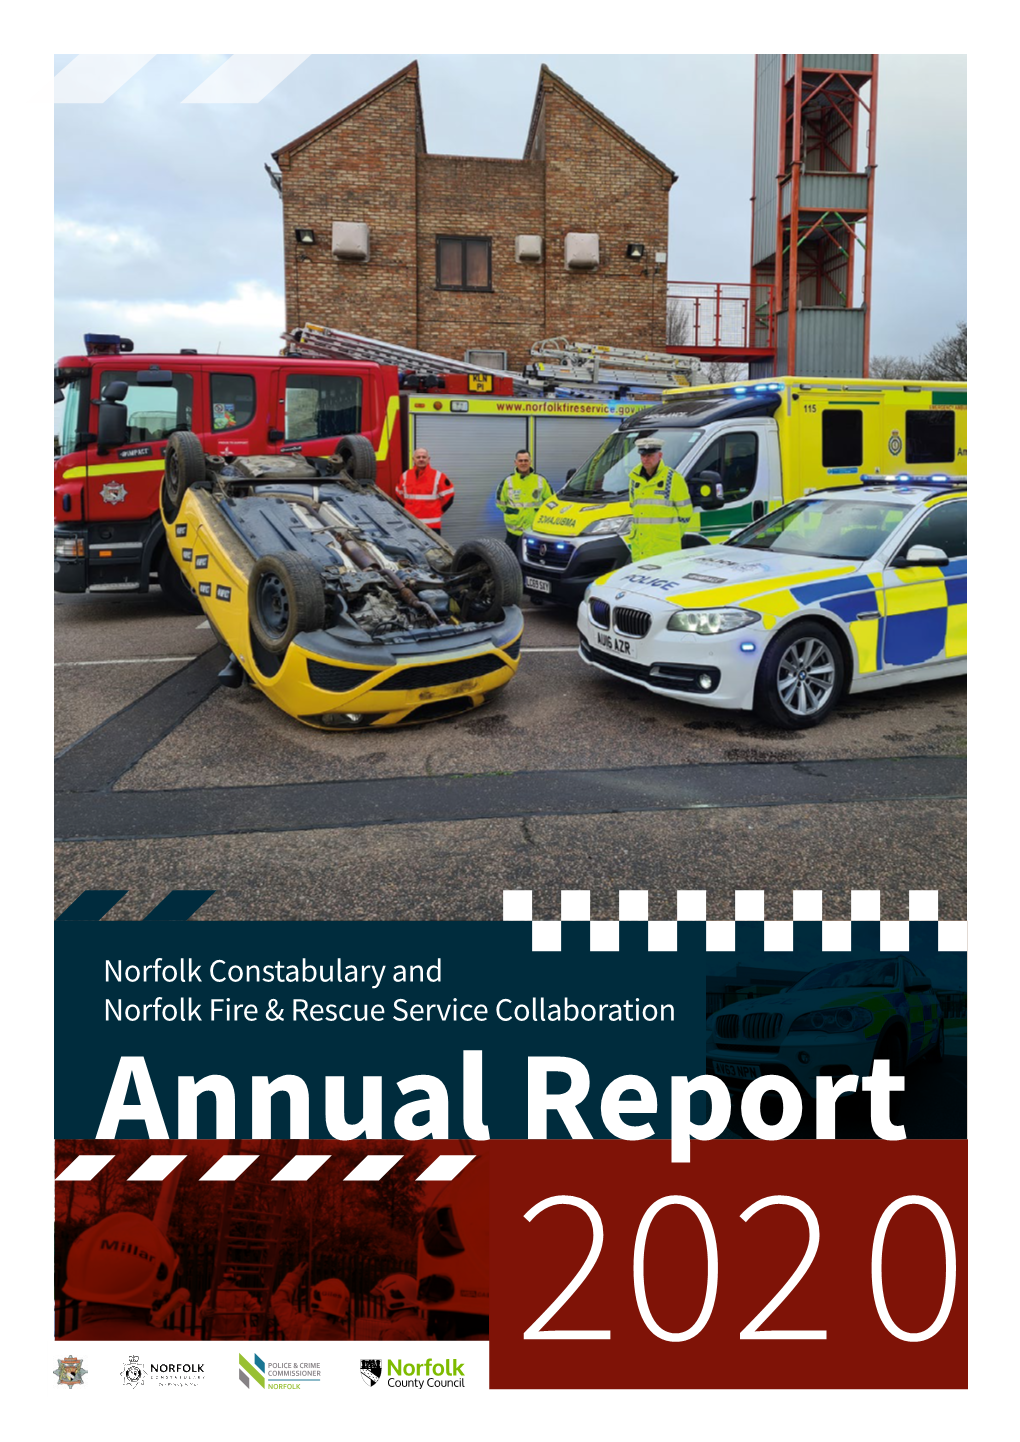 Norfolk Constabulary and Norfolk Fire Service Collaboration Annual